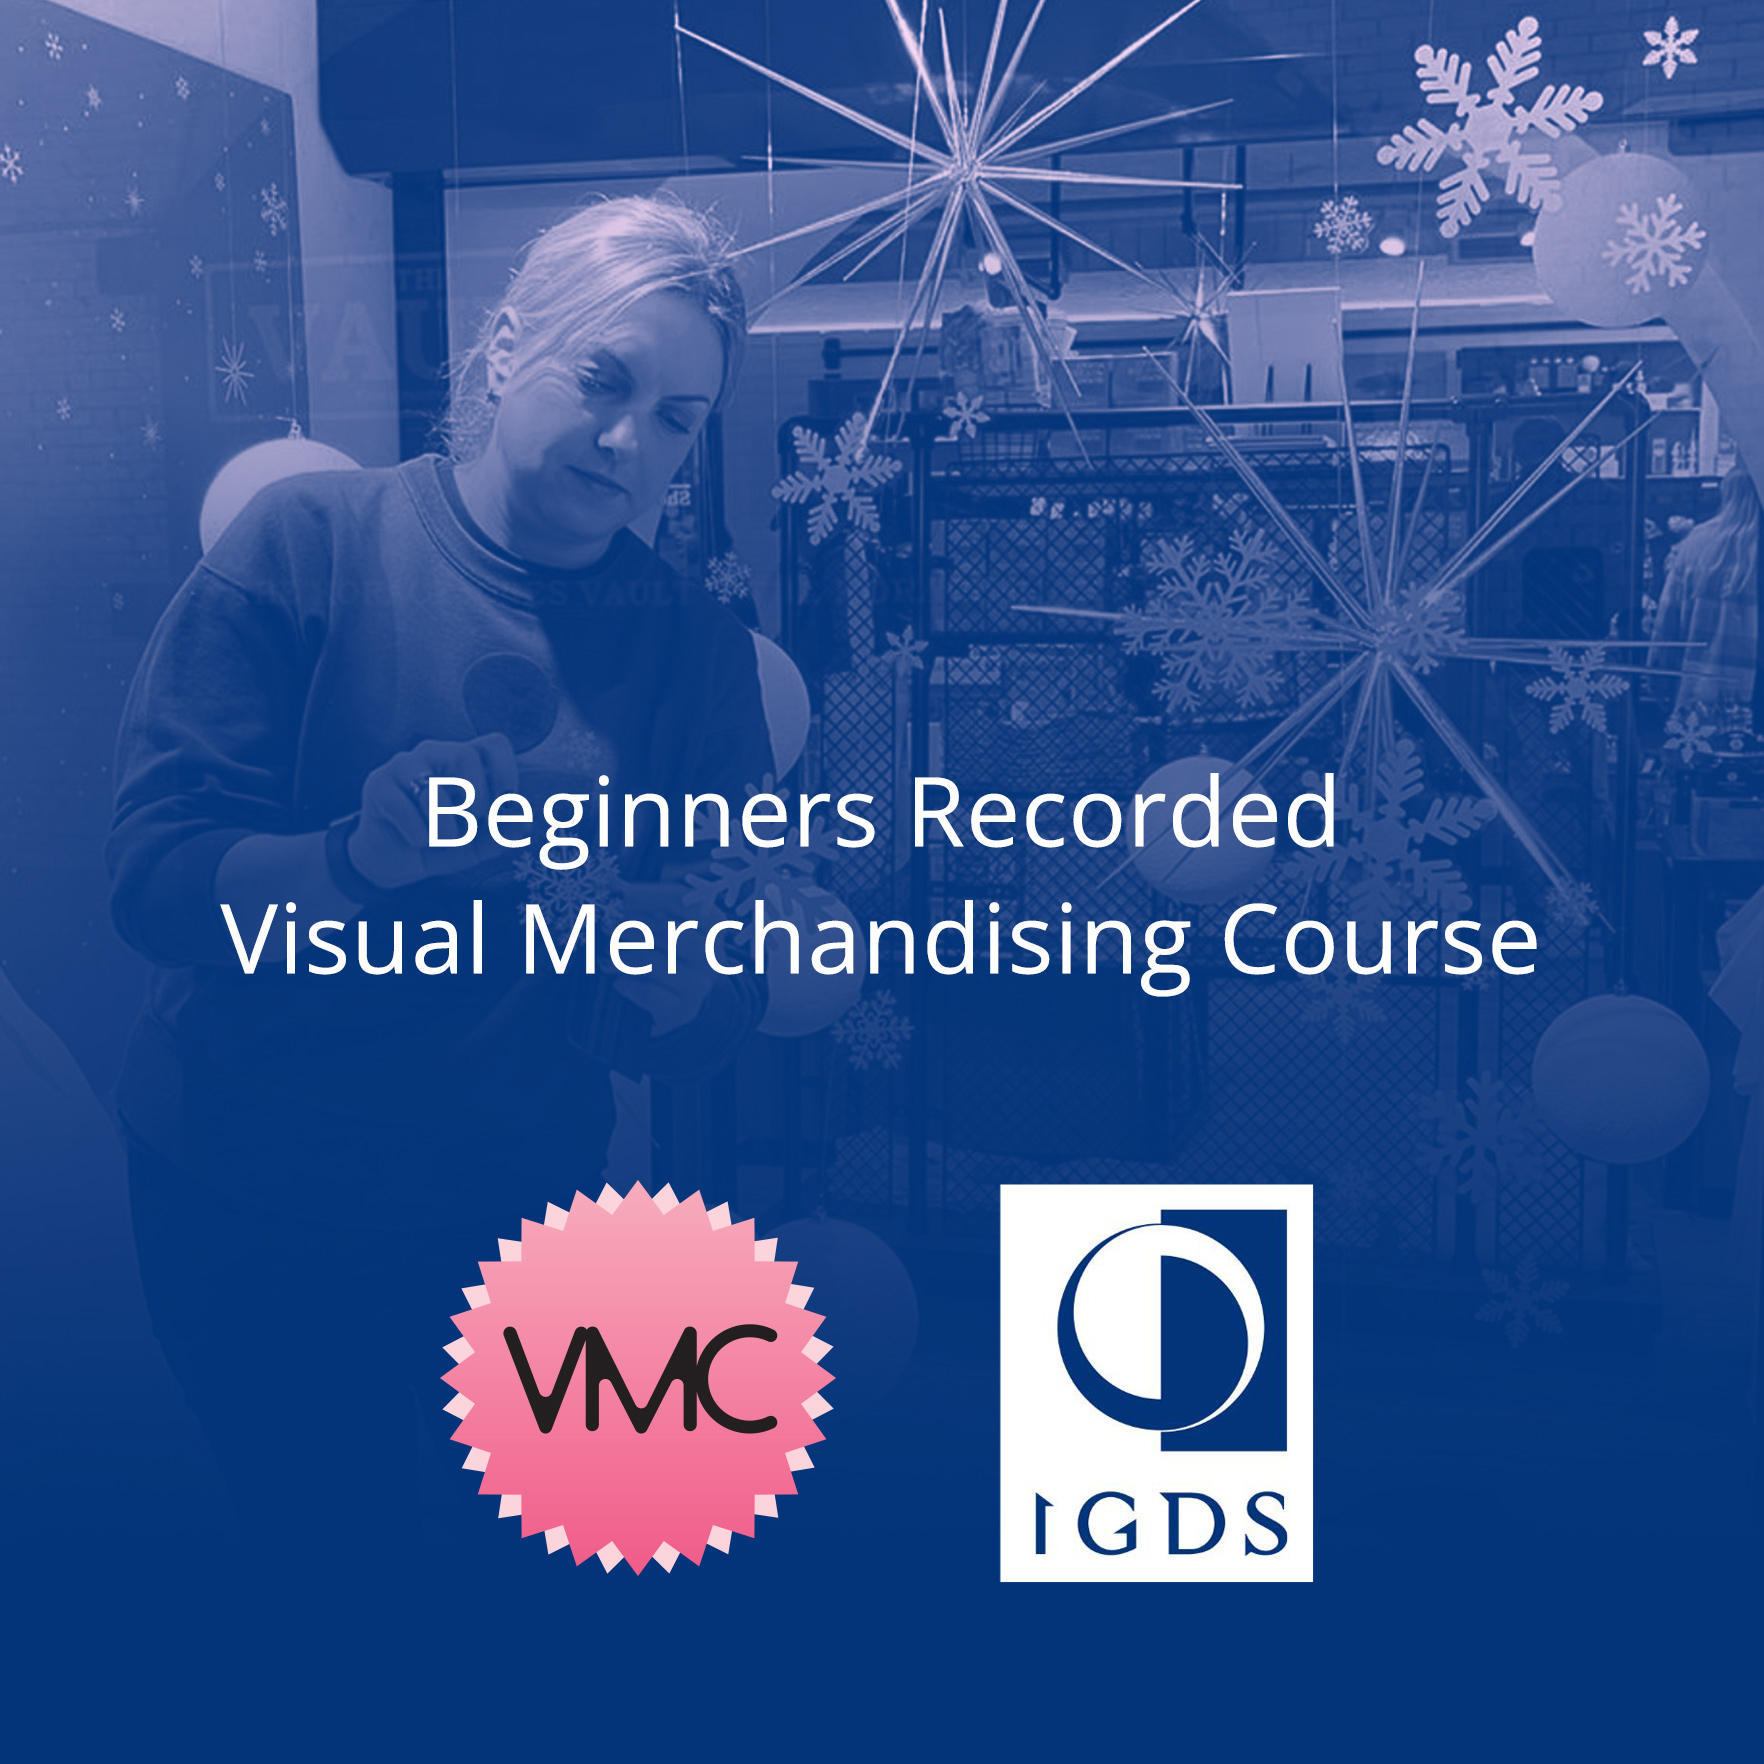 VMC Beginners Recorded courses